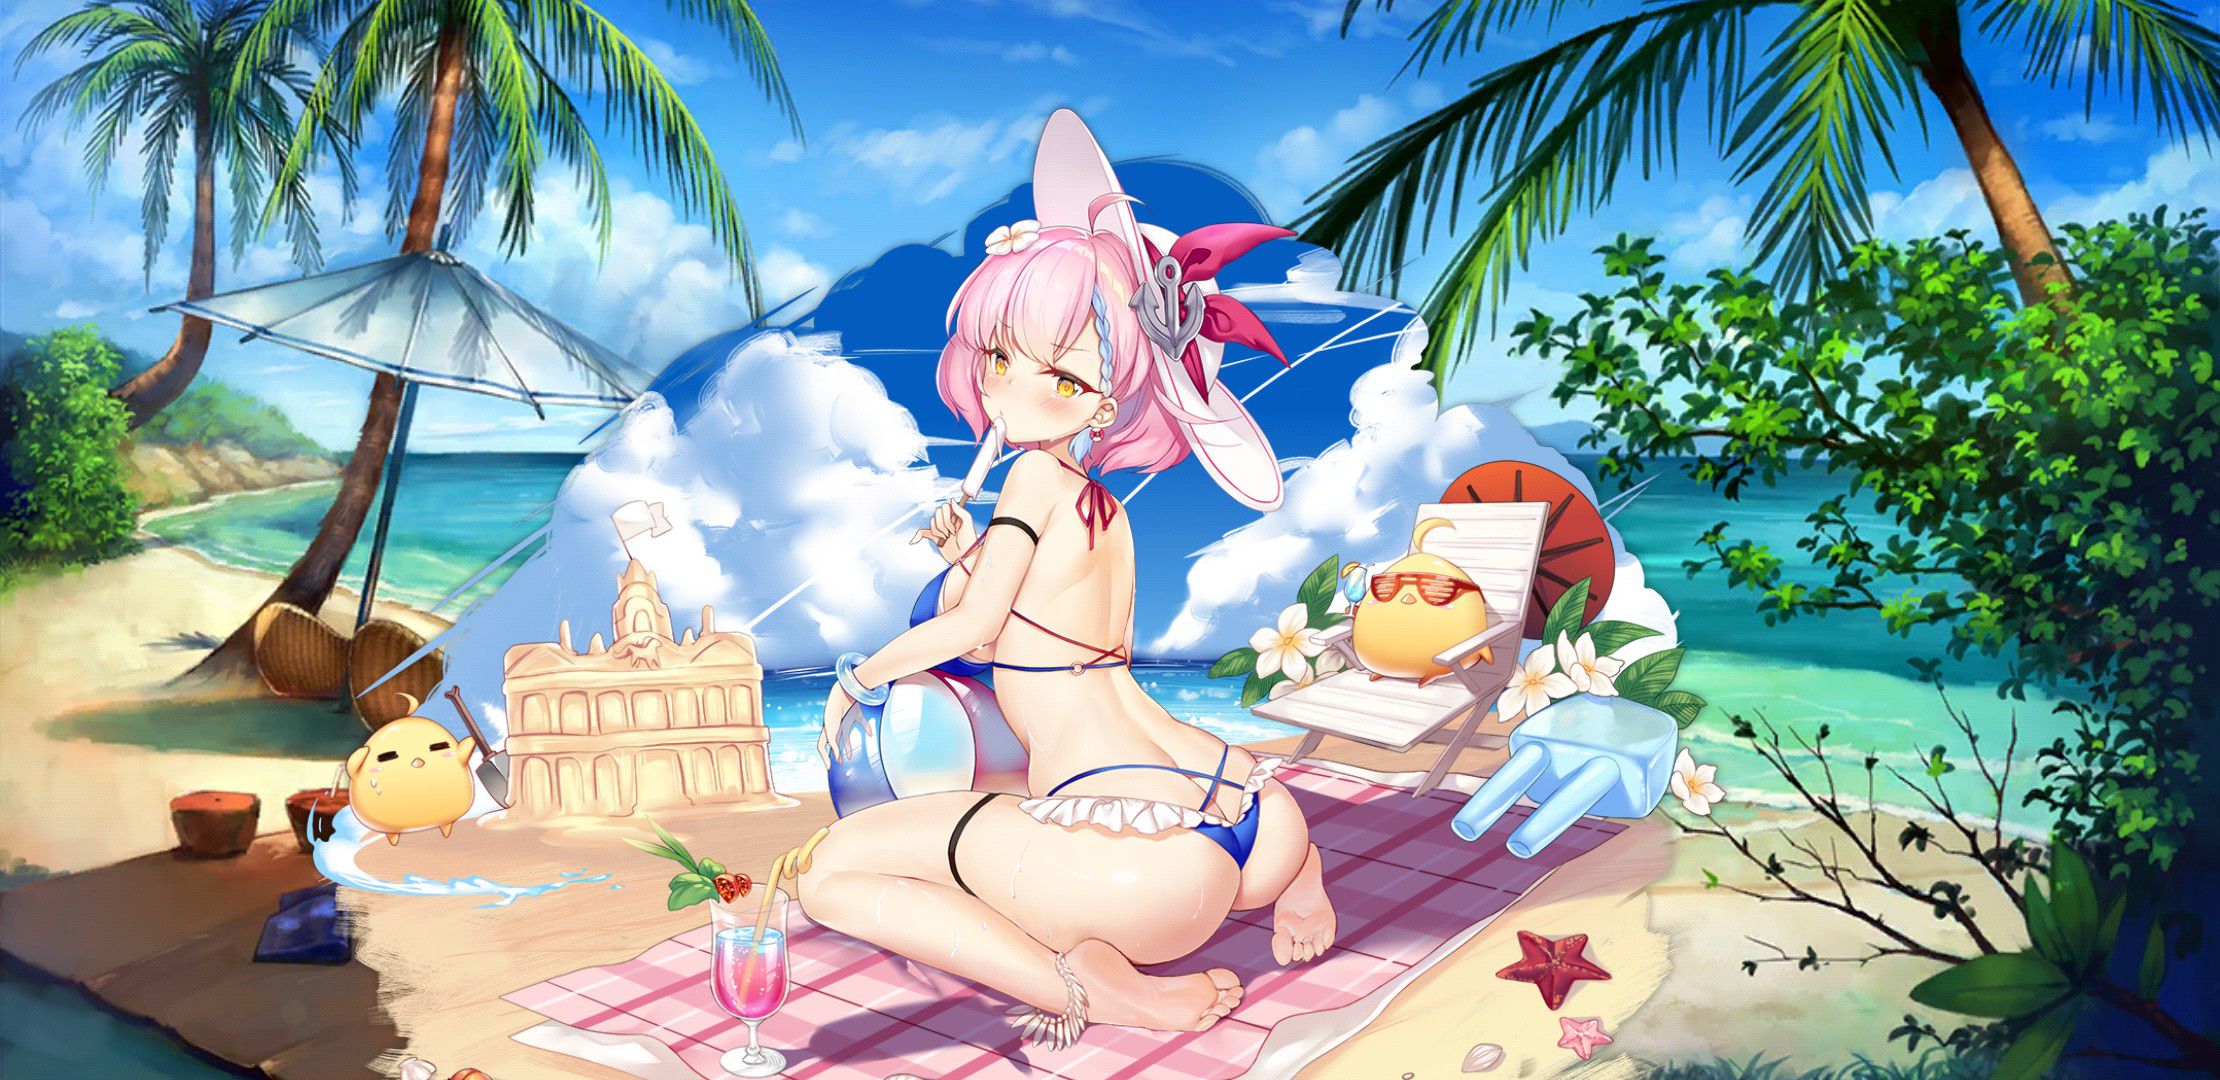 【There is an image】 Smartphone that urges charging with erotic swimsuits is malicious 40